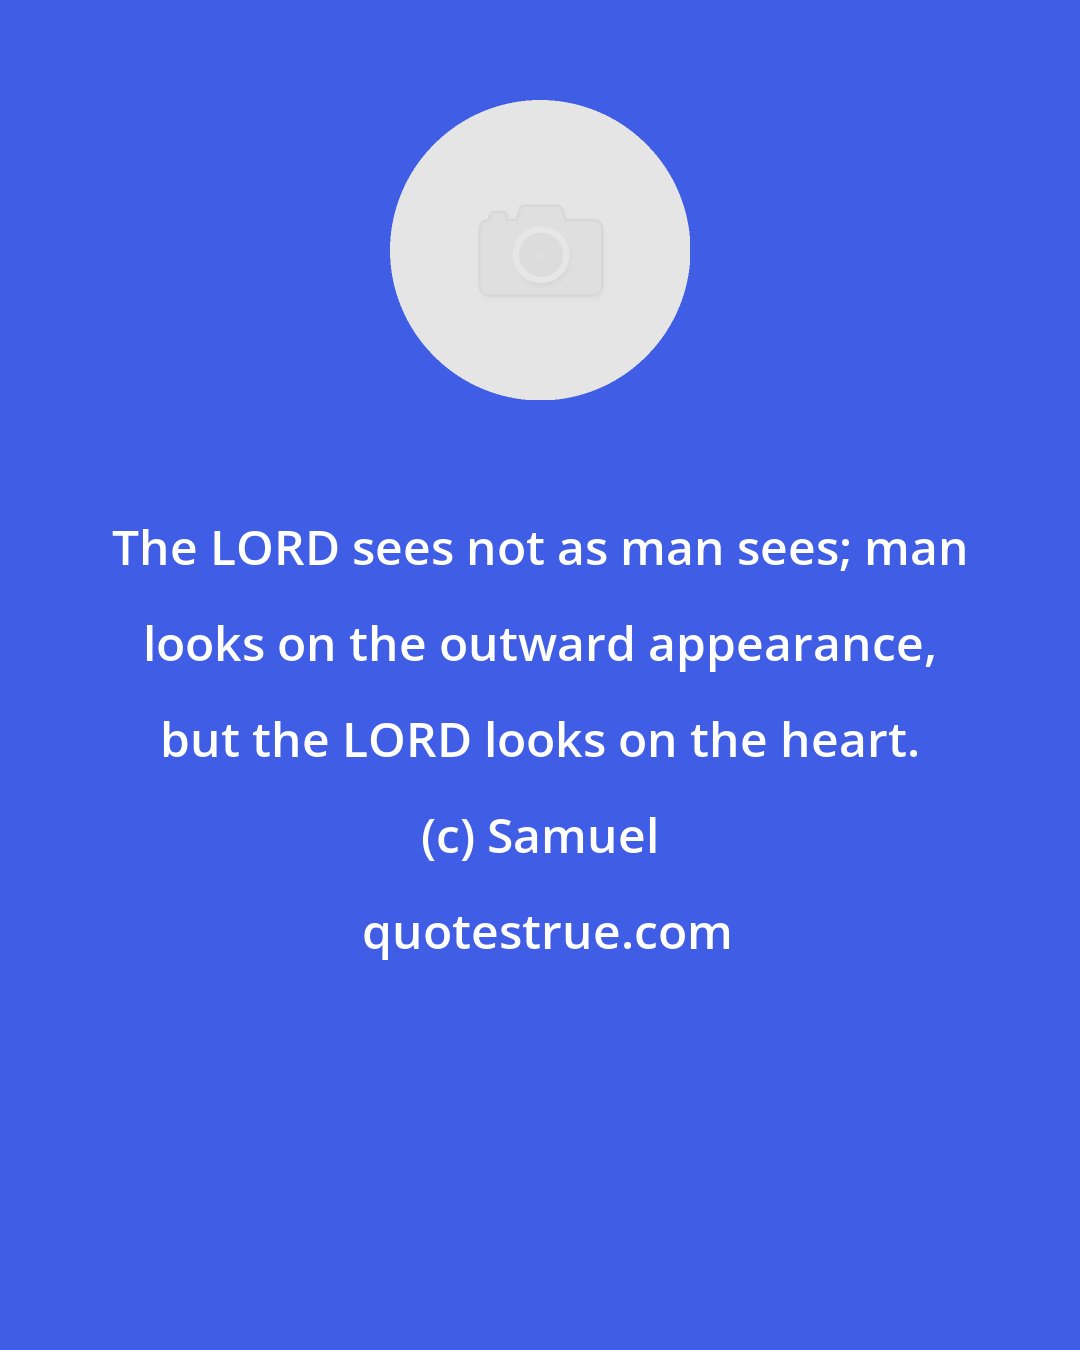 Samuel: The LORD sees not as man sees; man looks on the outward appearance, but the LORD looks on the heart.